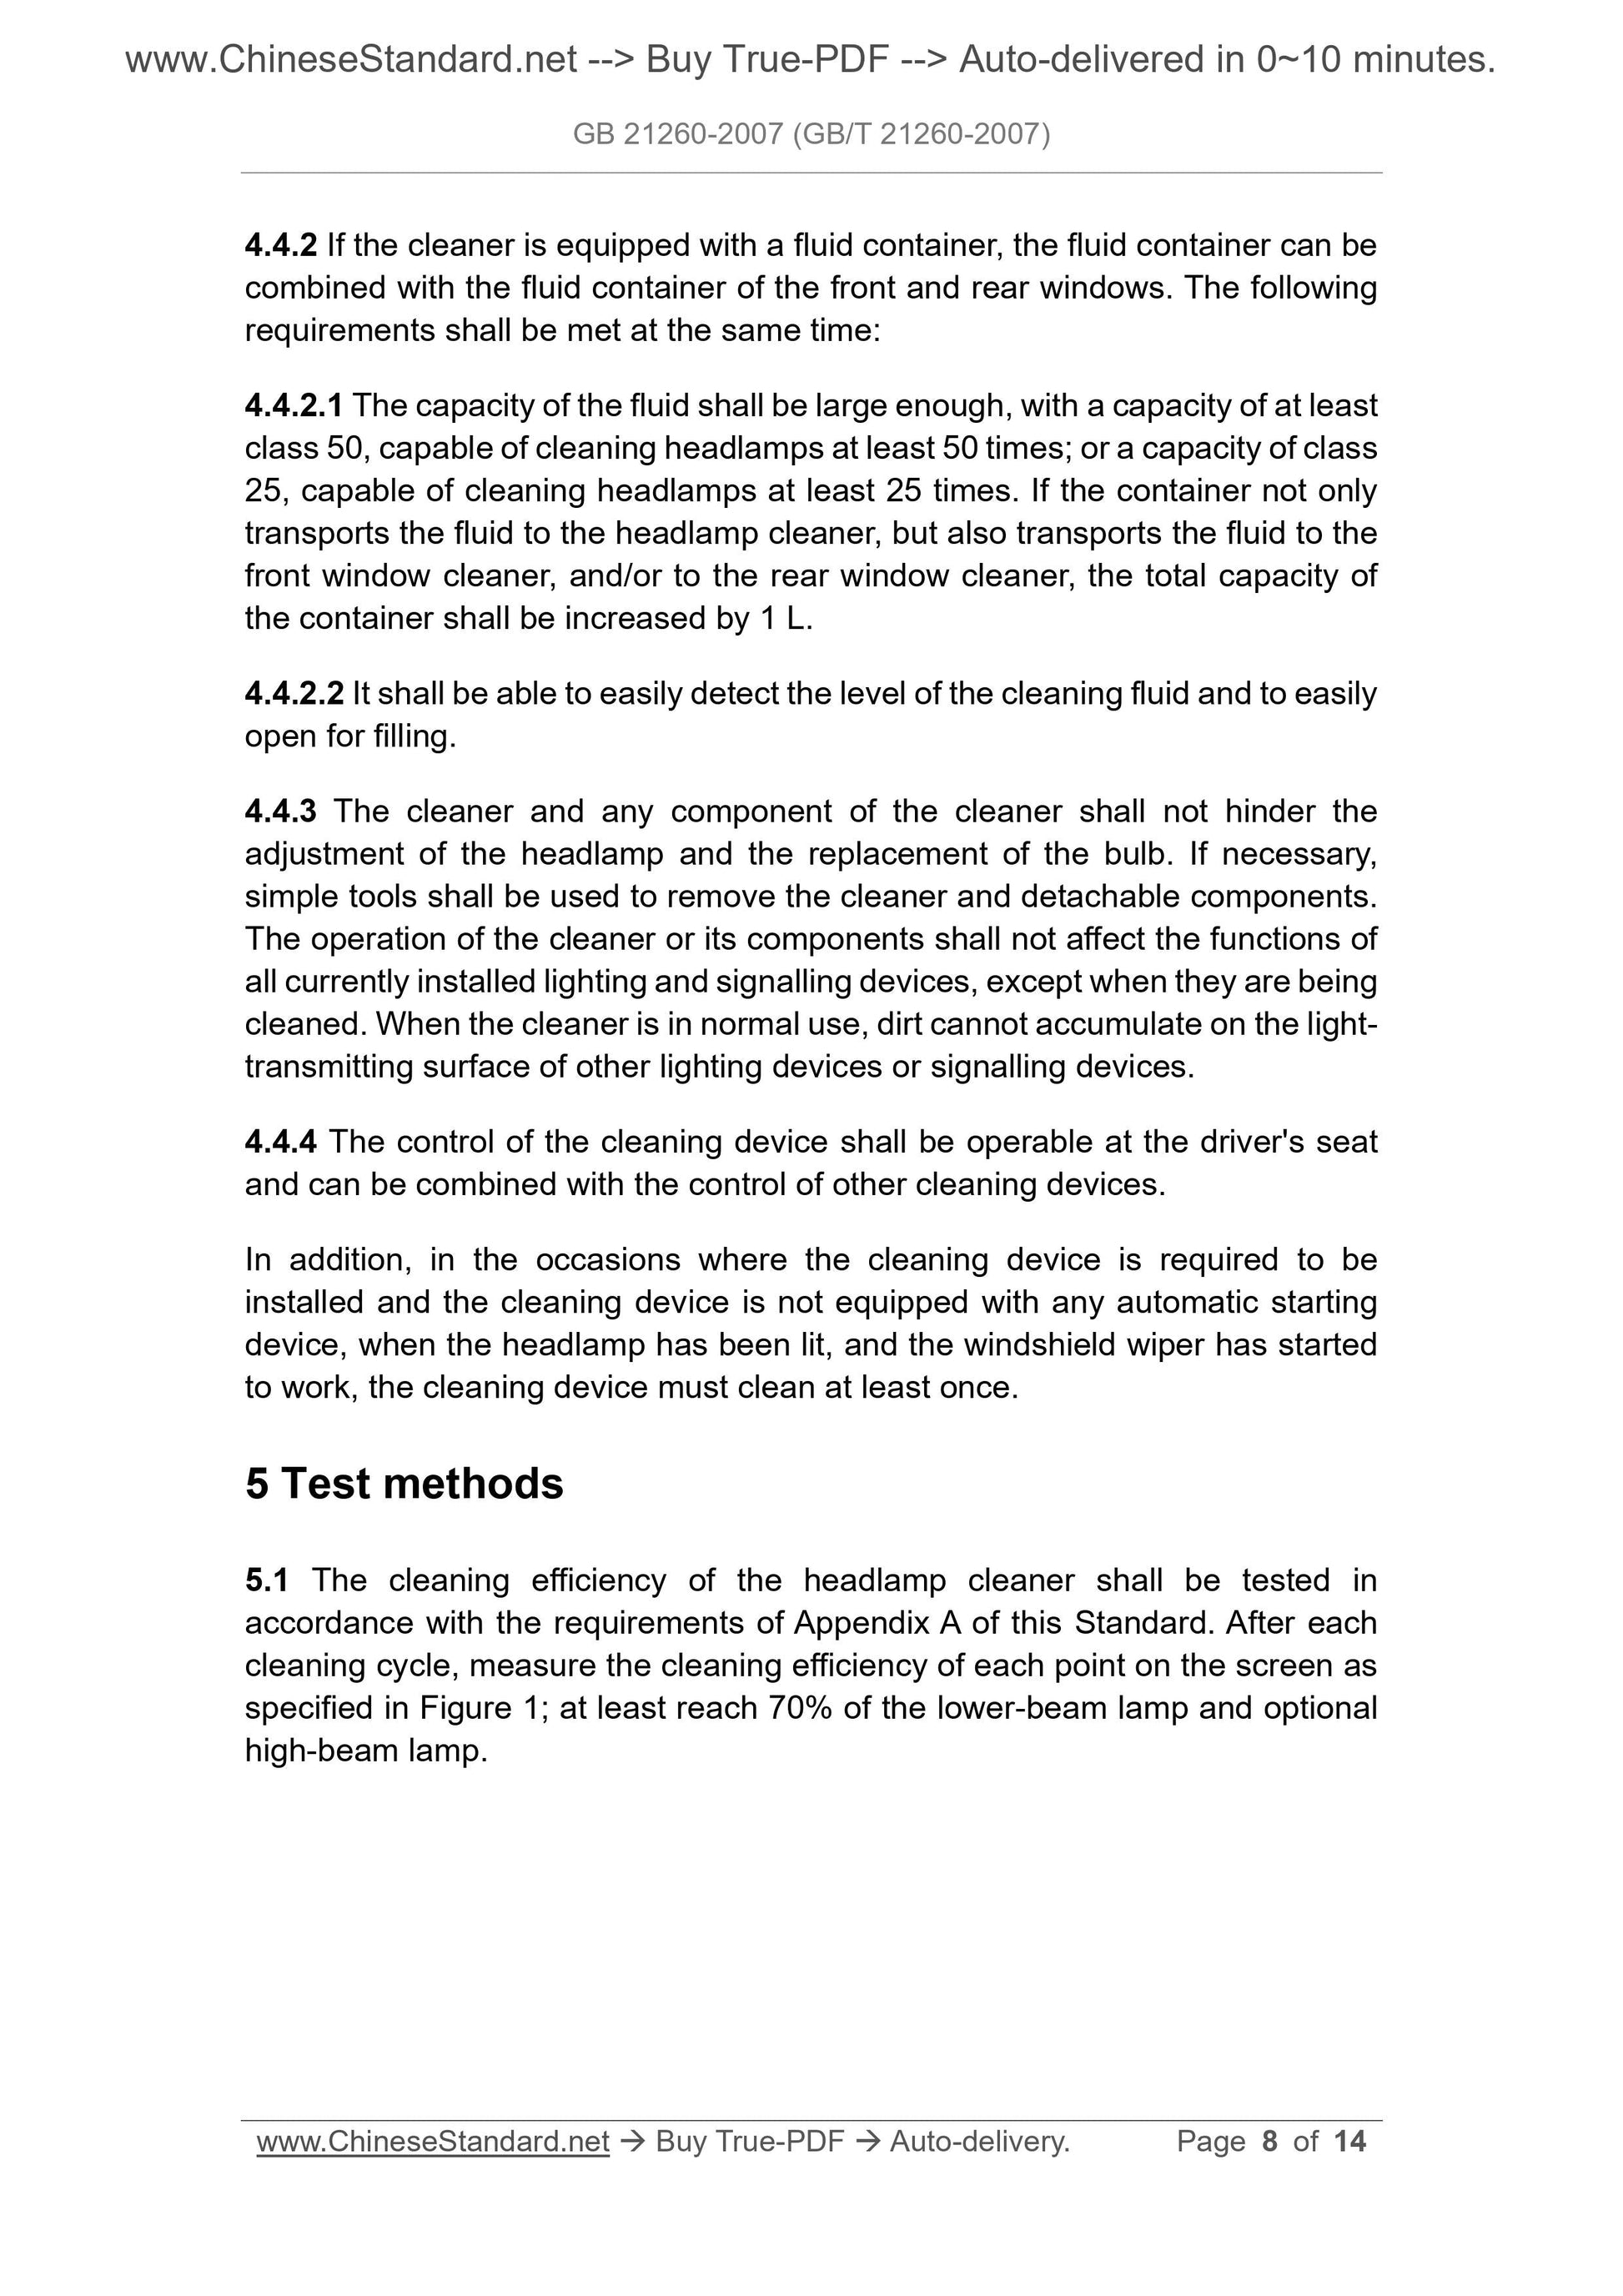 GB 21260-2007 Page 5